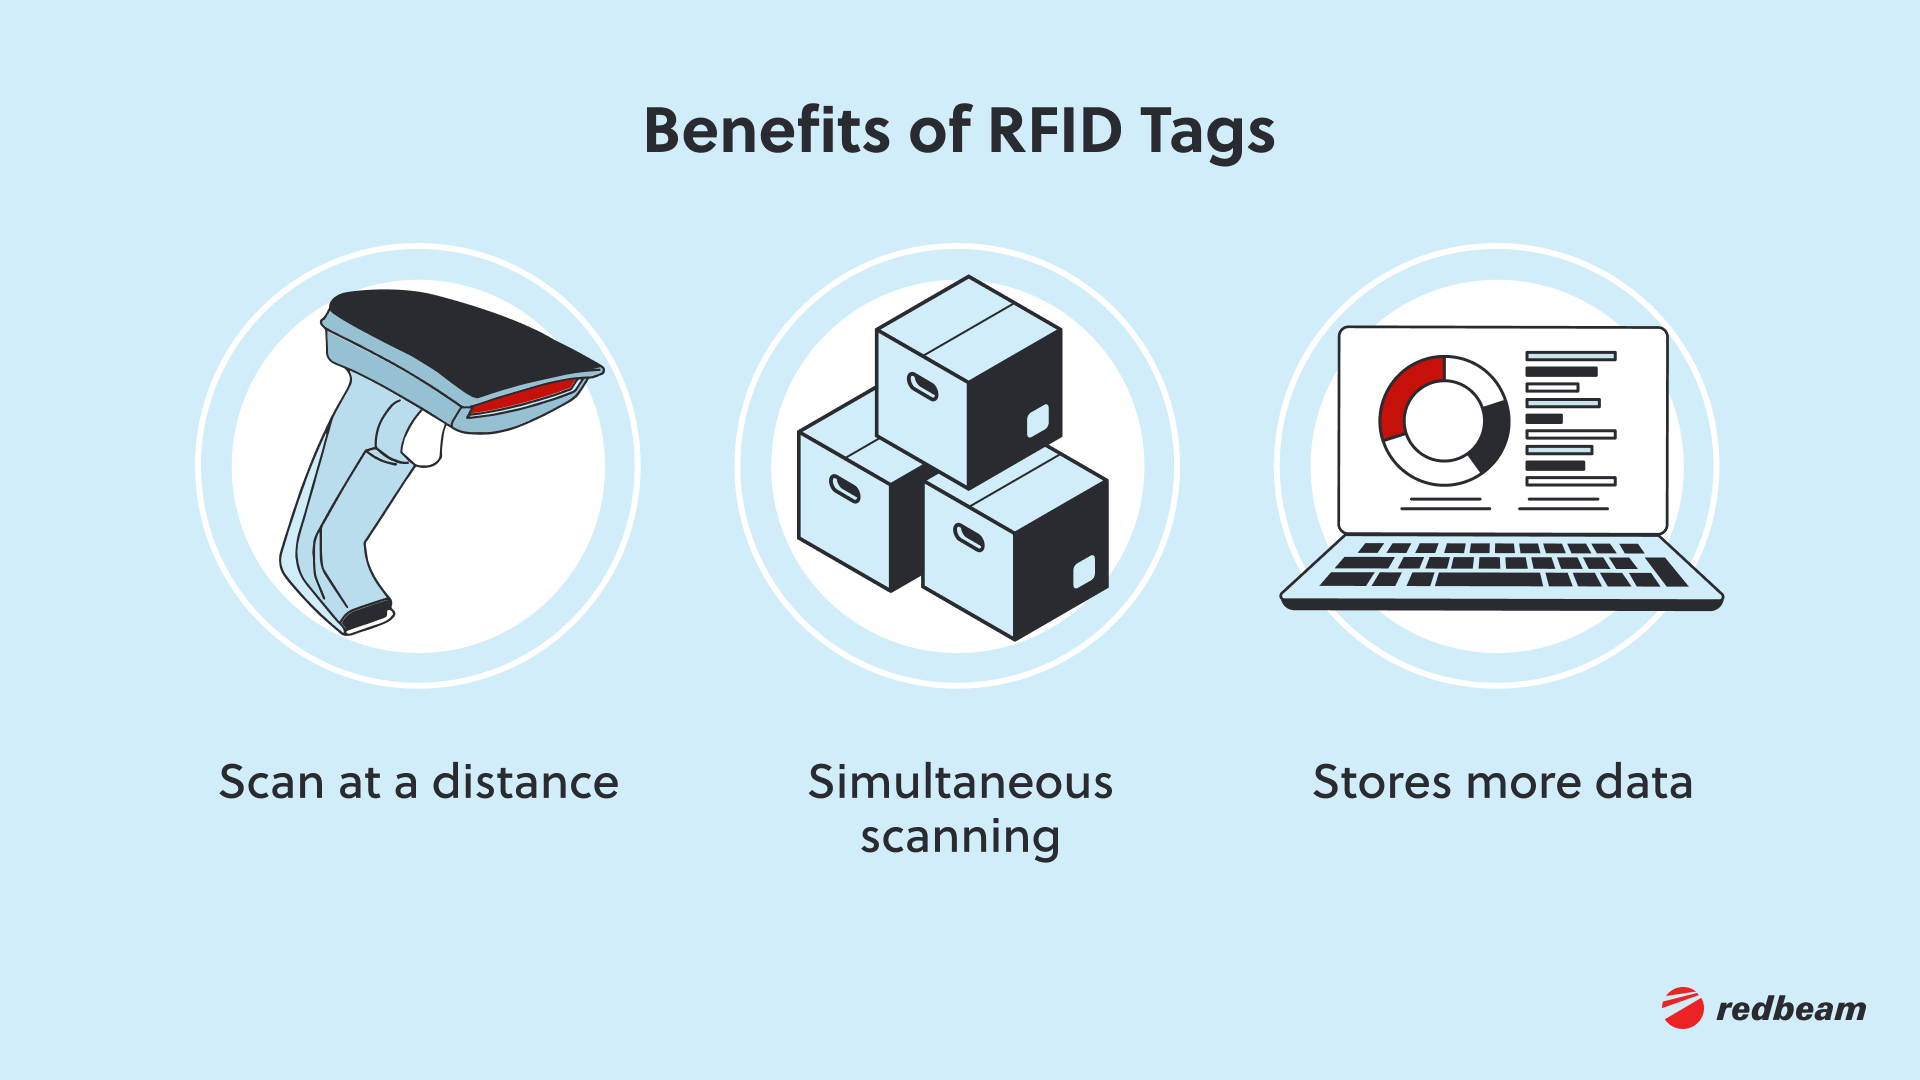 4.Benefits of RFID Tags